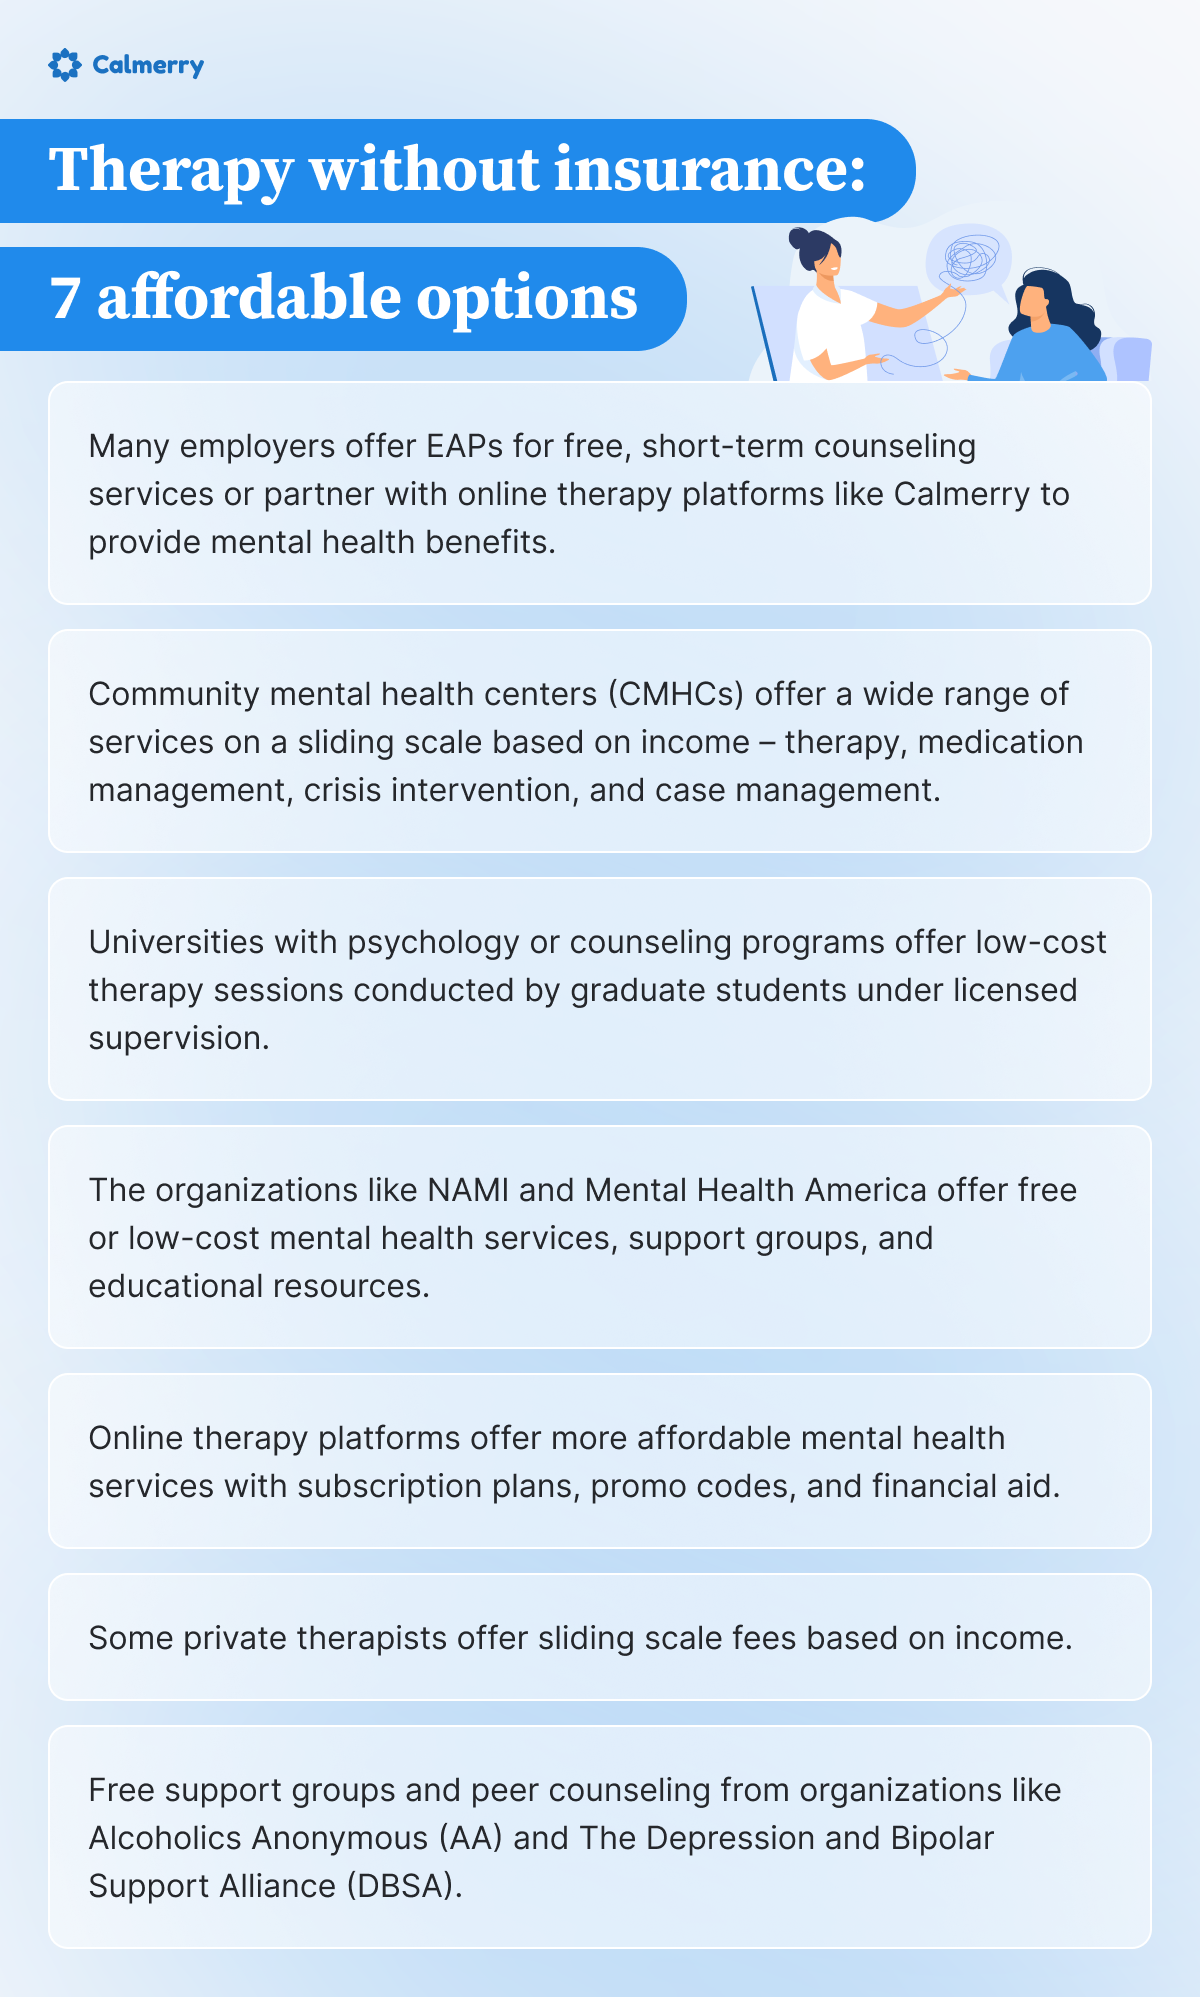 A Calmerry-branded infographic titled "Therapy without insurance: 7 affordable options." The graphic features an illustration of a therapist on a computer screen holding a tangled line, symbolizing thoughts or problems, which connects to a woman sitting on a chair, engaging in a therapy session. Below the title, the infographic lists seven affordable options for therapy without insurance:

Many employers offer EAPs for free, short-term counseling services or partner with online therapy platforms like Calmerry to provide mental health benefits.
Community mental health centers (CMHCs) offer a wide range of services on a sliding scale based on income – therapy, medication management, crisis intervention, and case management.
Universities with psychology or counseling programs offer low-cost therapy sessions conducted by graduate students under licensed supervision.
Organizations like NAMI and Mental Health America offer free or low-cost mental health services, support groups, and educational resources.
Online therapy platforms offer more affordable mental health services with subscription plans, promo codes, and financial aid.
Some private therapists offer sliding scale fees based on income.
Free support groups and peer counseling from organizations like Alcoholics Anonymous (AA) and The Depression and Bipolar Support Alliance (DBSA).